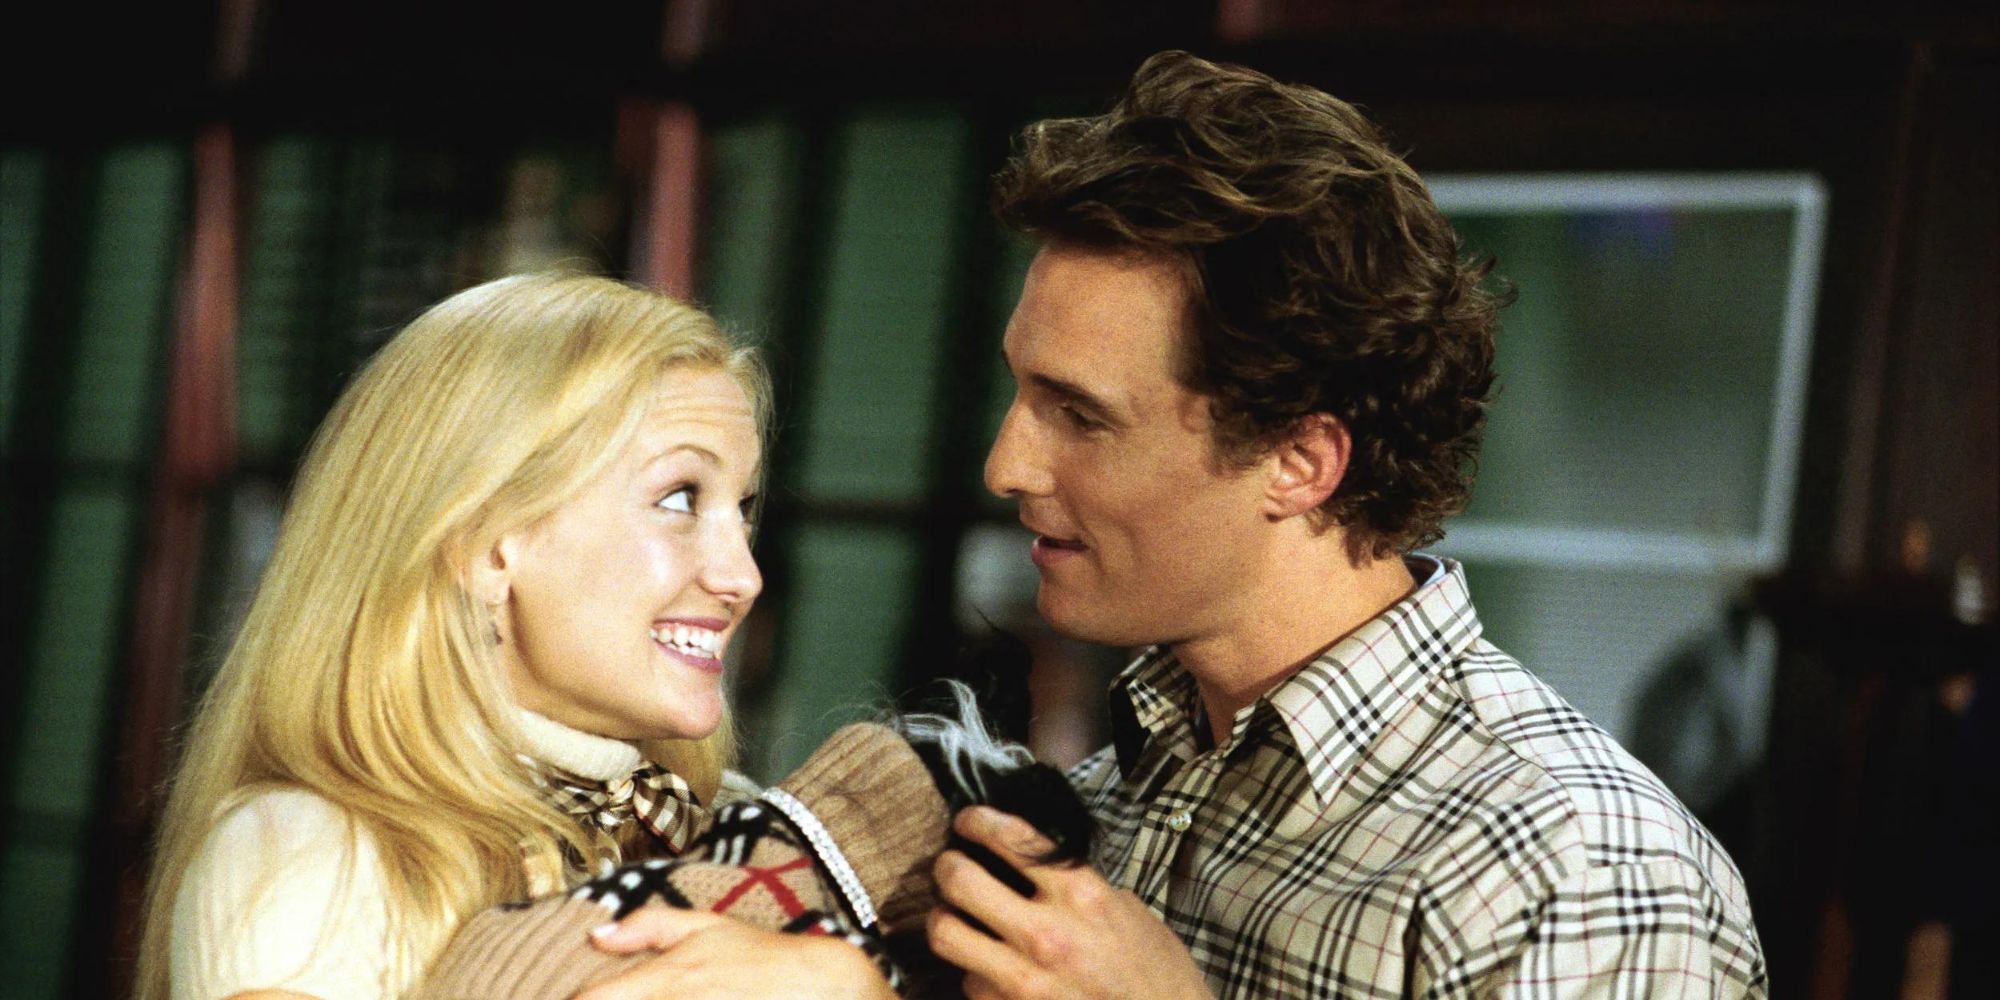 Kate Hudson as Andie and Matthew McConaughey Ben from How To Lose A Guy In 10 Days looking at each other